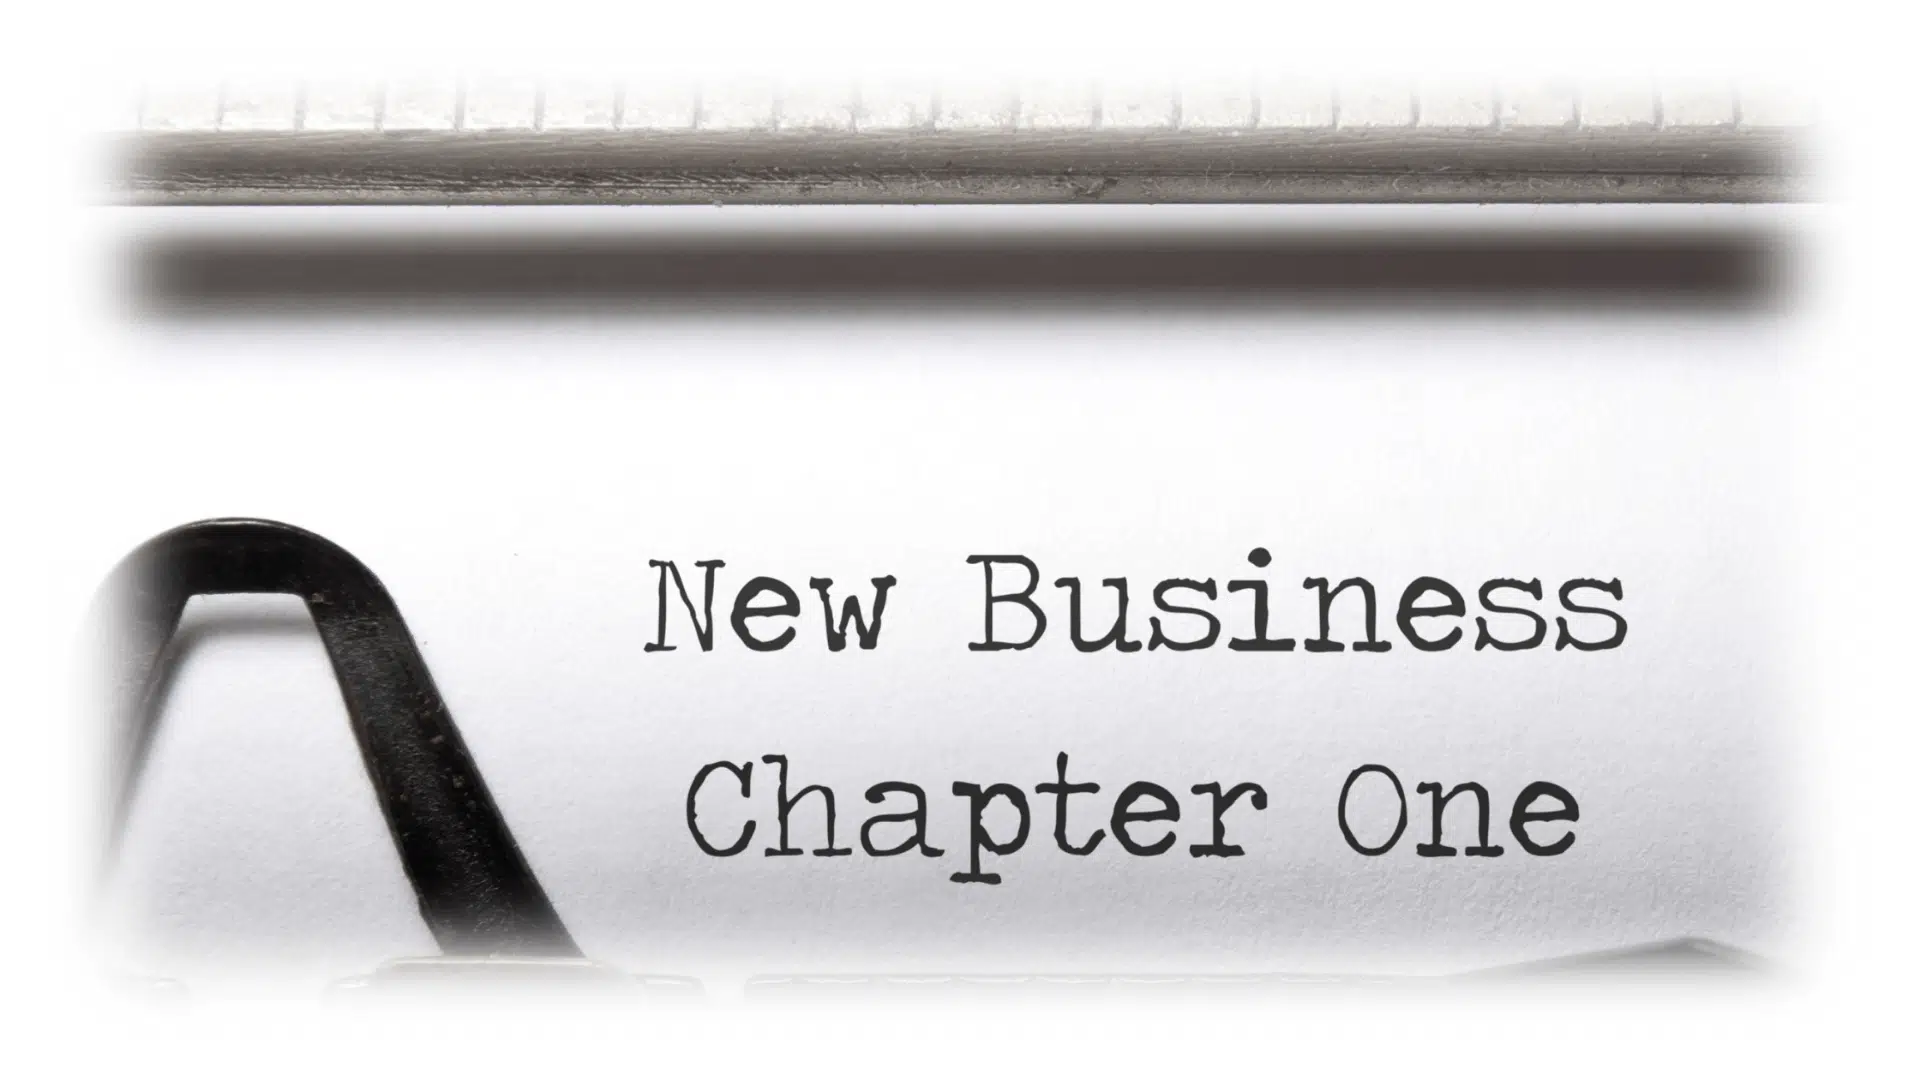 New Business Plan chapter one (1920x1080)